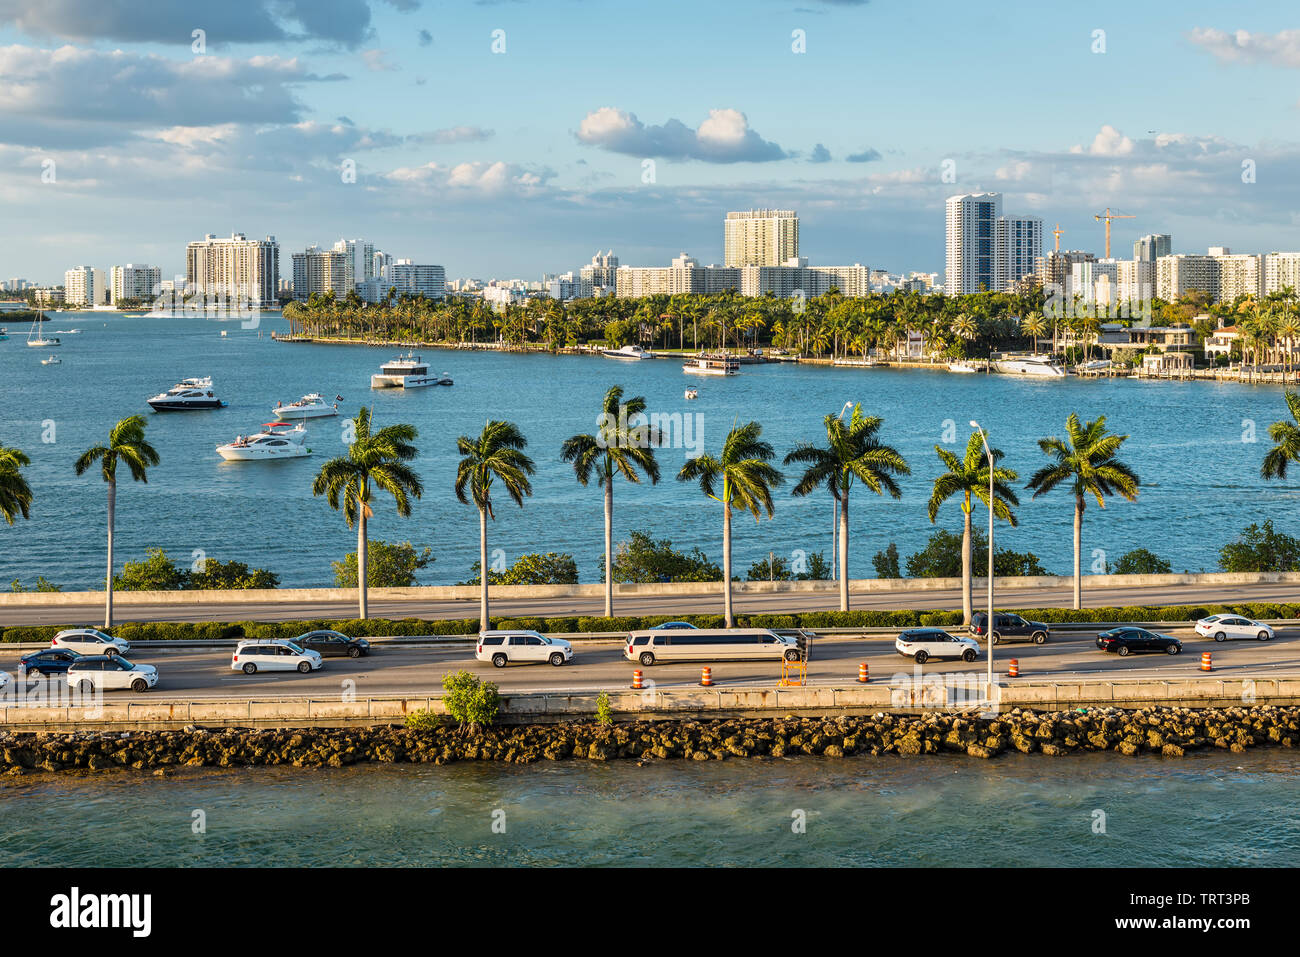 Miami, FL, United States - April 20, 2019: MacArthur Causeway at Biscayne Bay in Miami, Florida, USA. The MacArthur Causeway is a colossal six-lane en Stock Photo